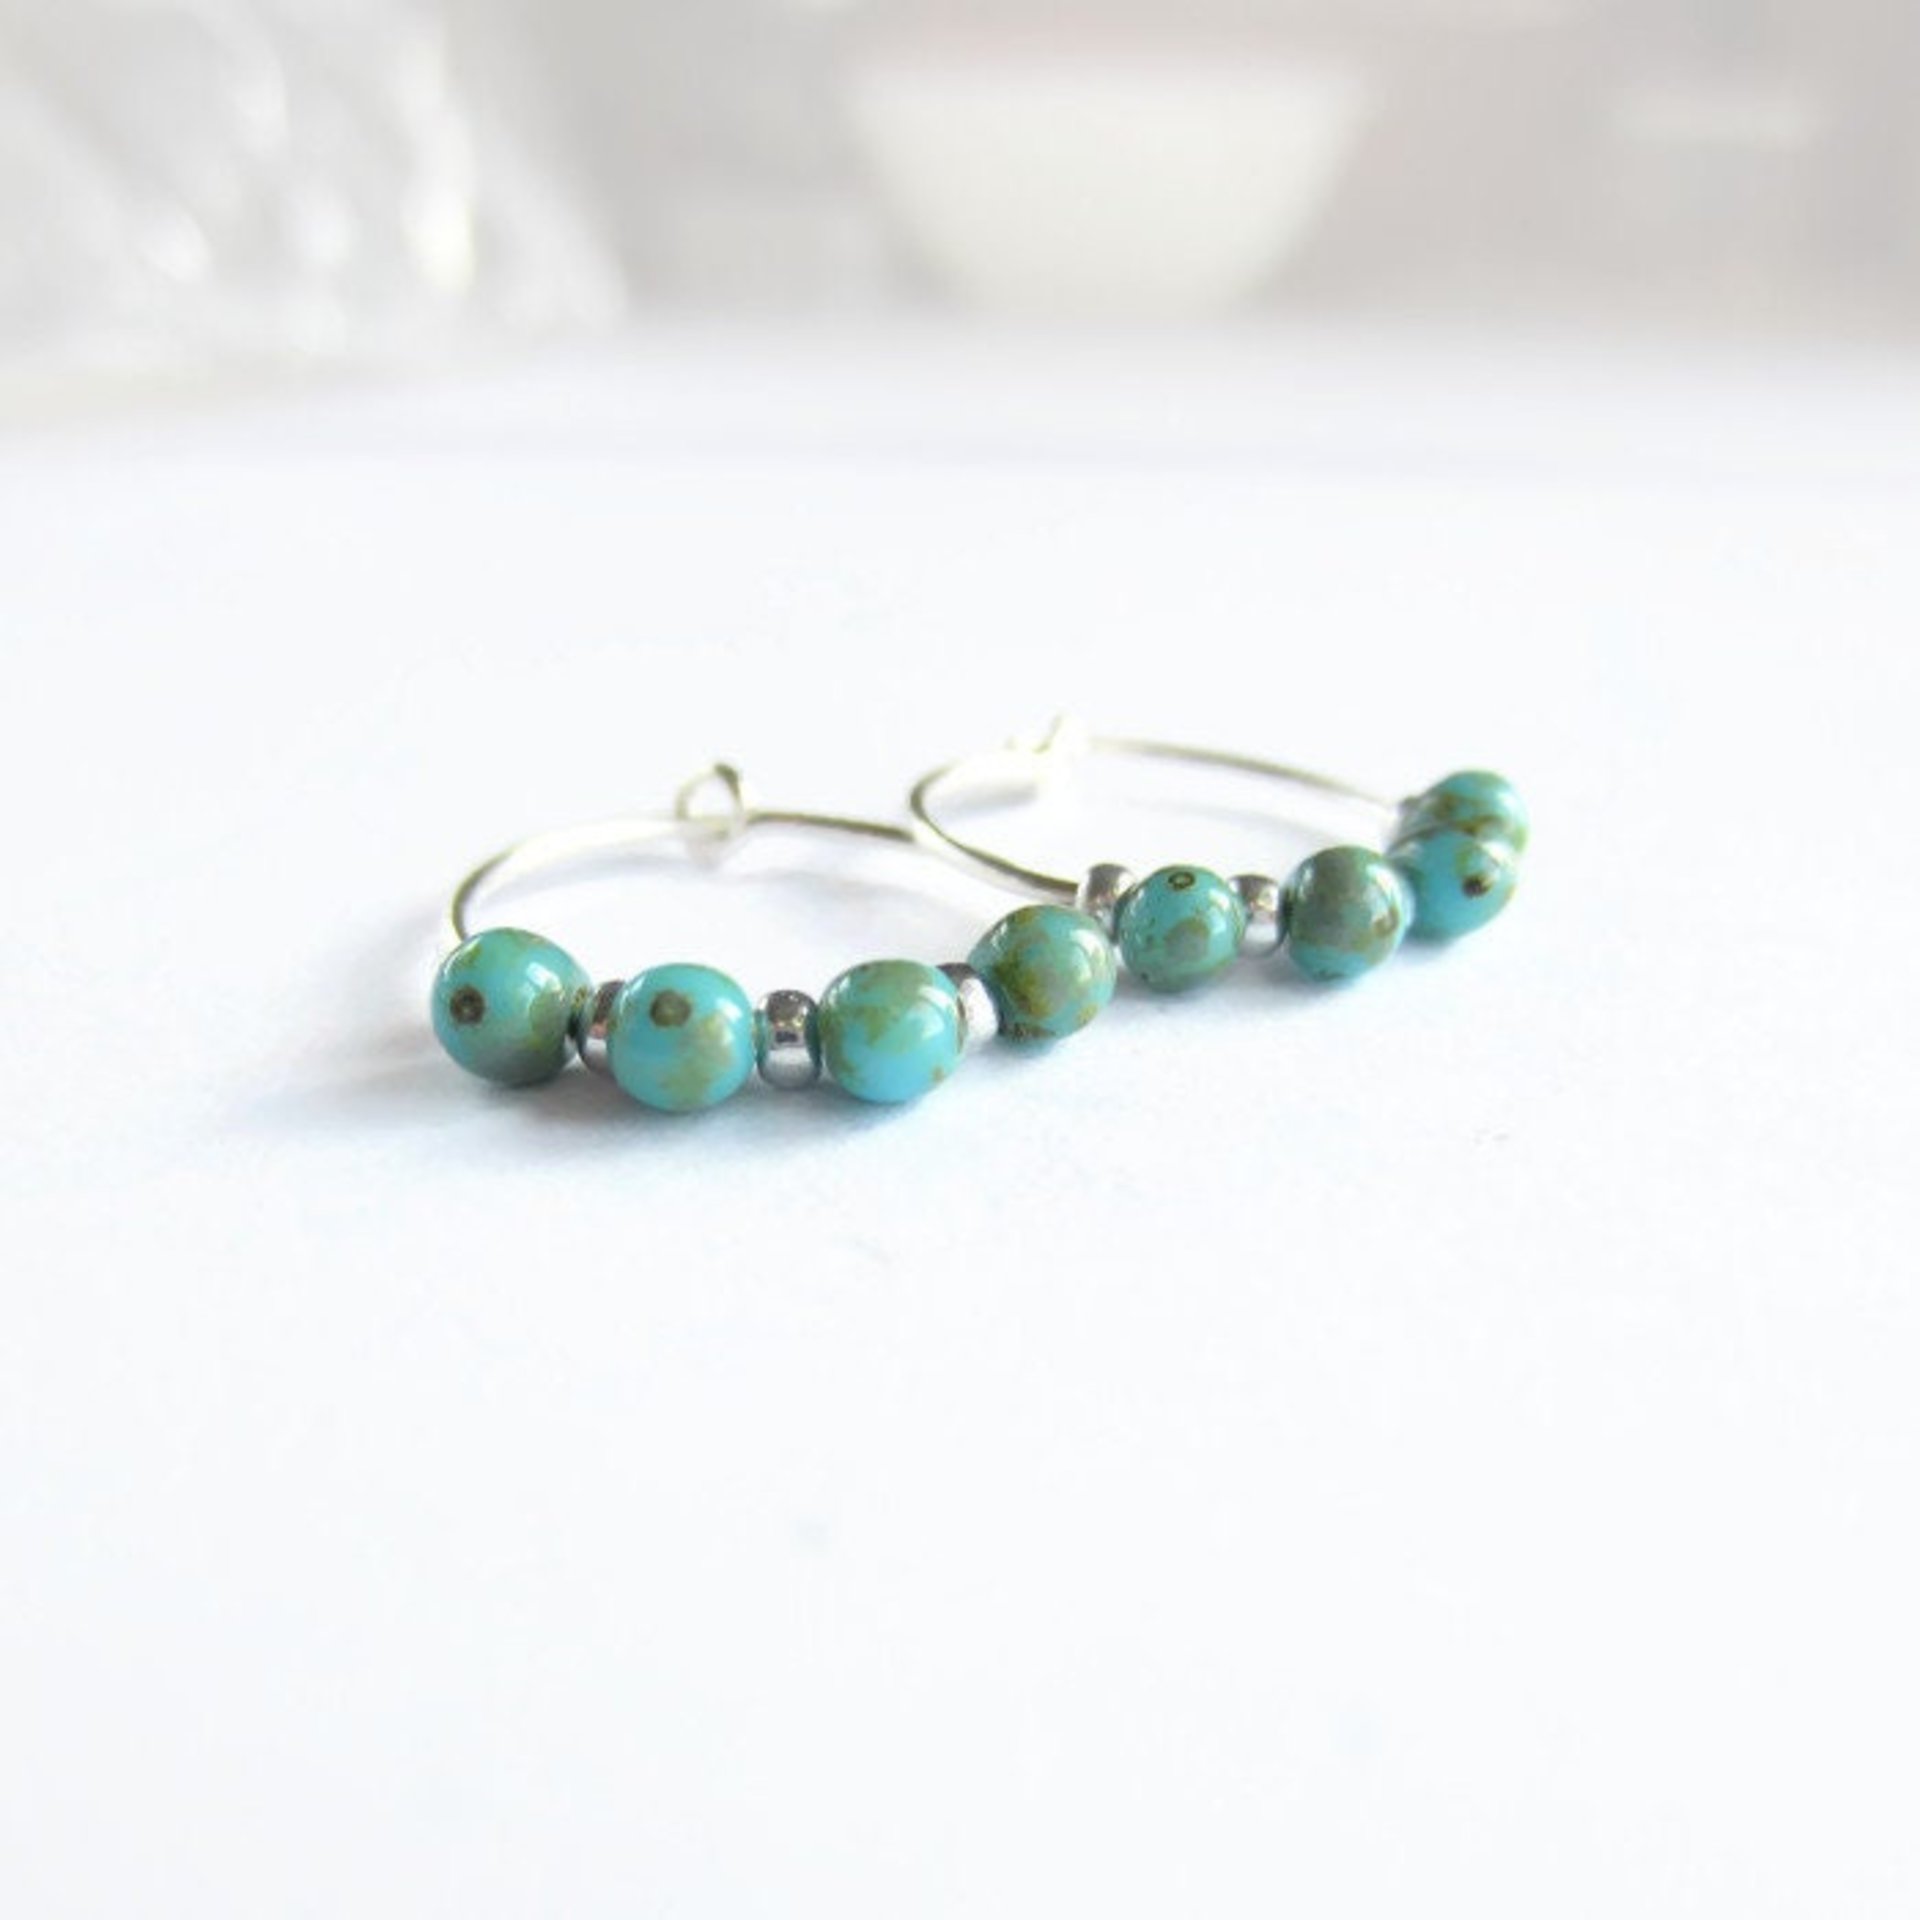 Turquoise Blue Czech Glass Beaded Silver Hoop Earrings ~ 925 Sterling Silver ~ Handmade by The Tiny Tree Frog Jewellery